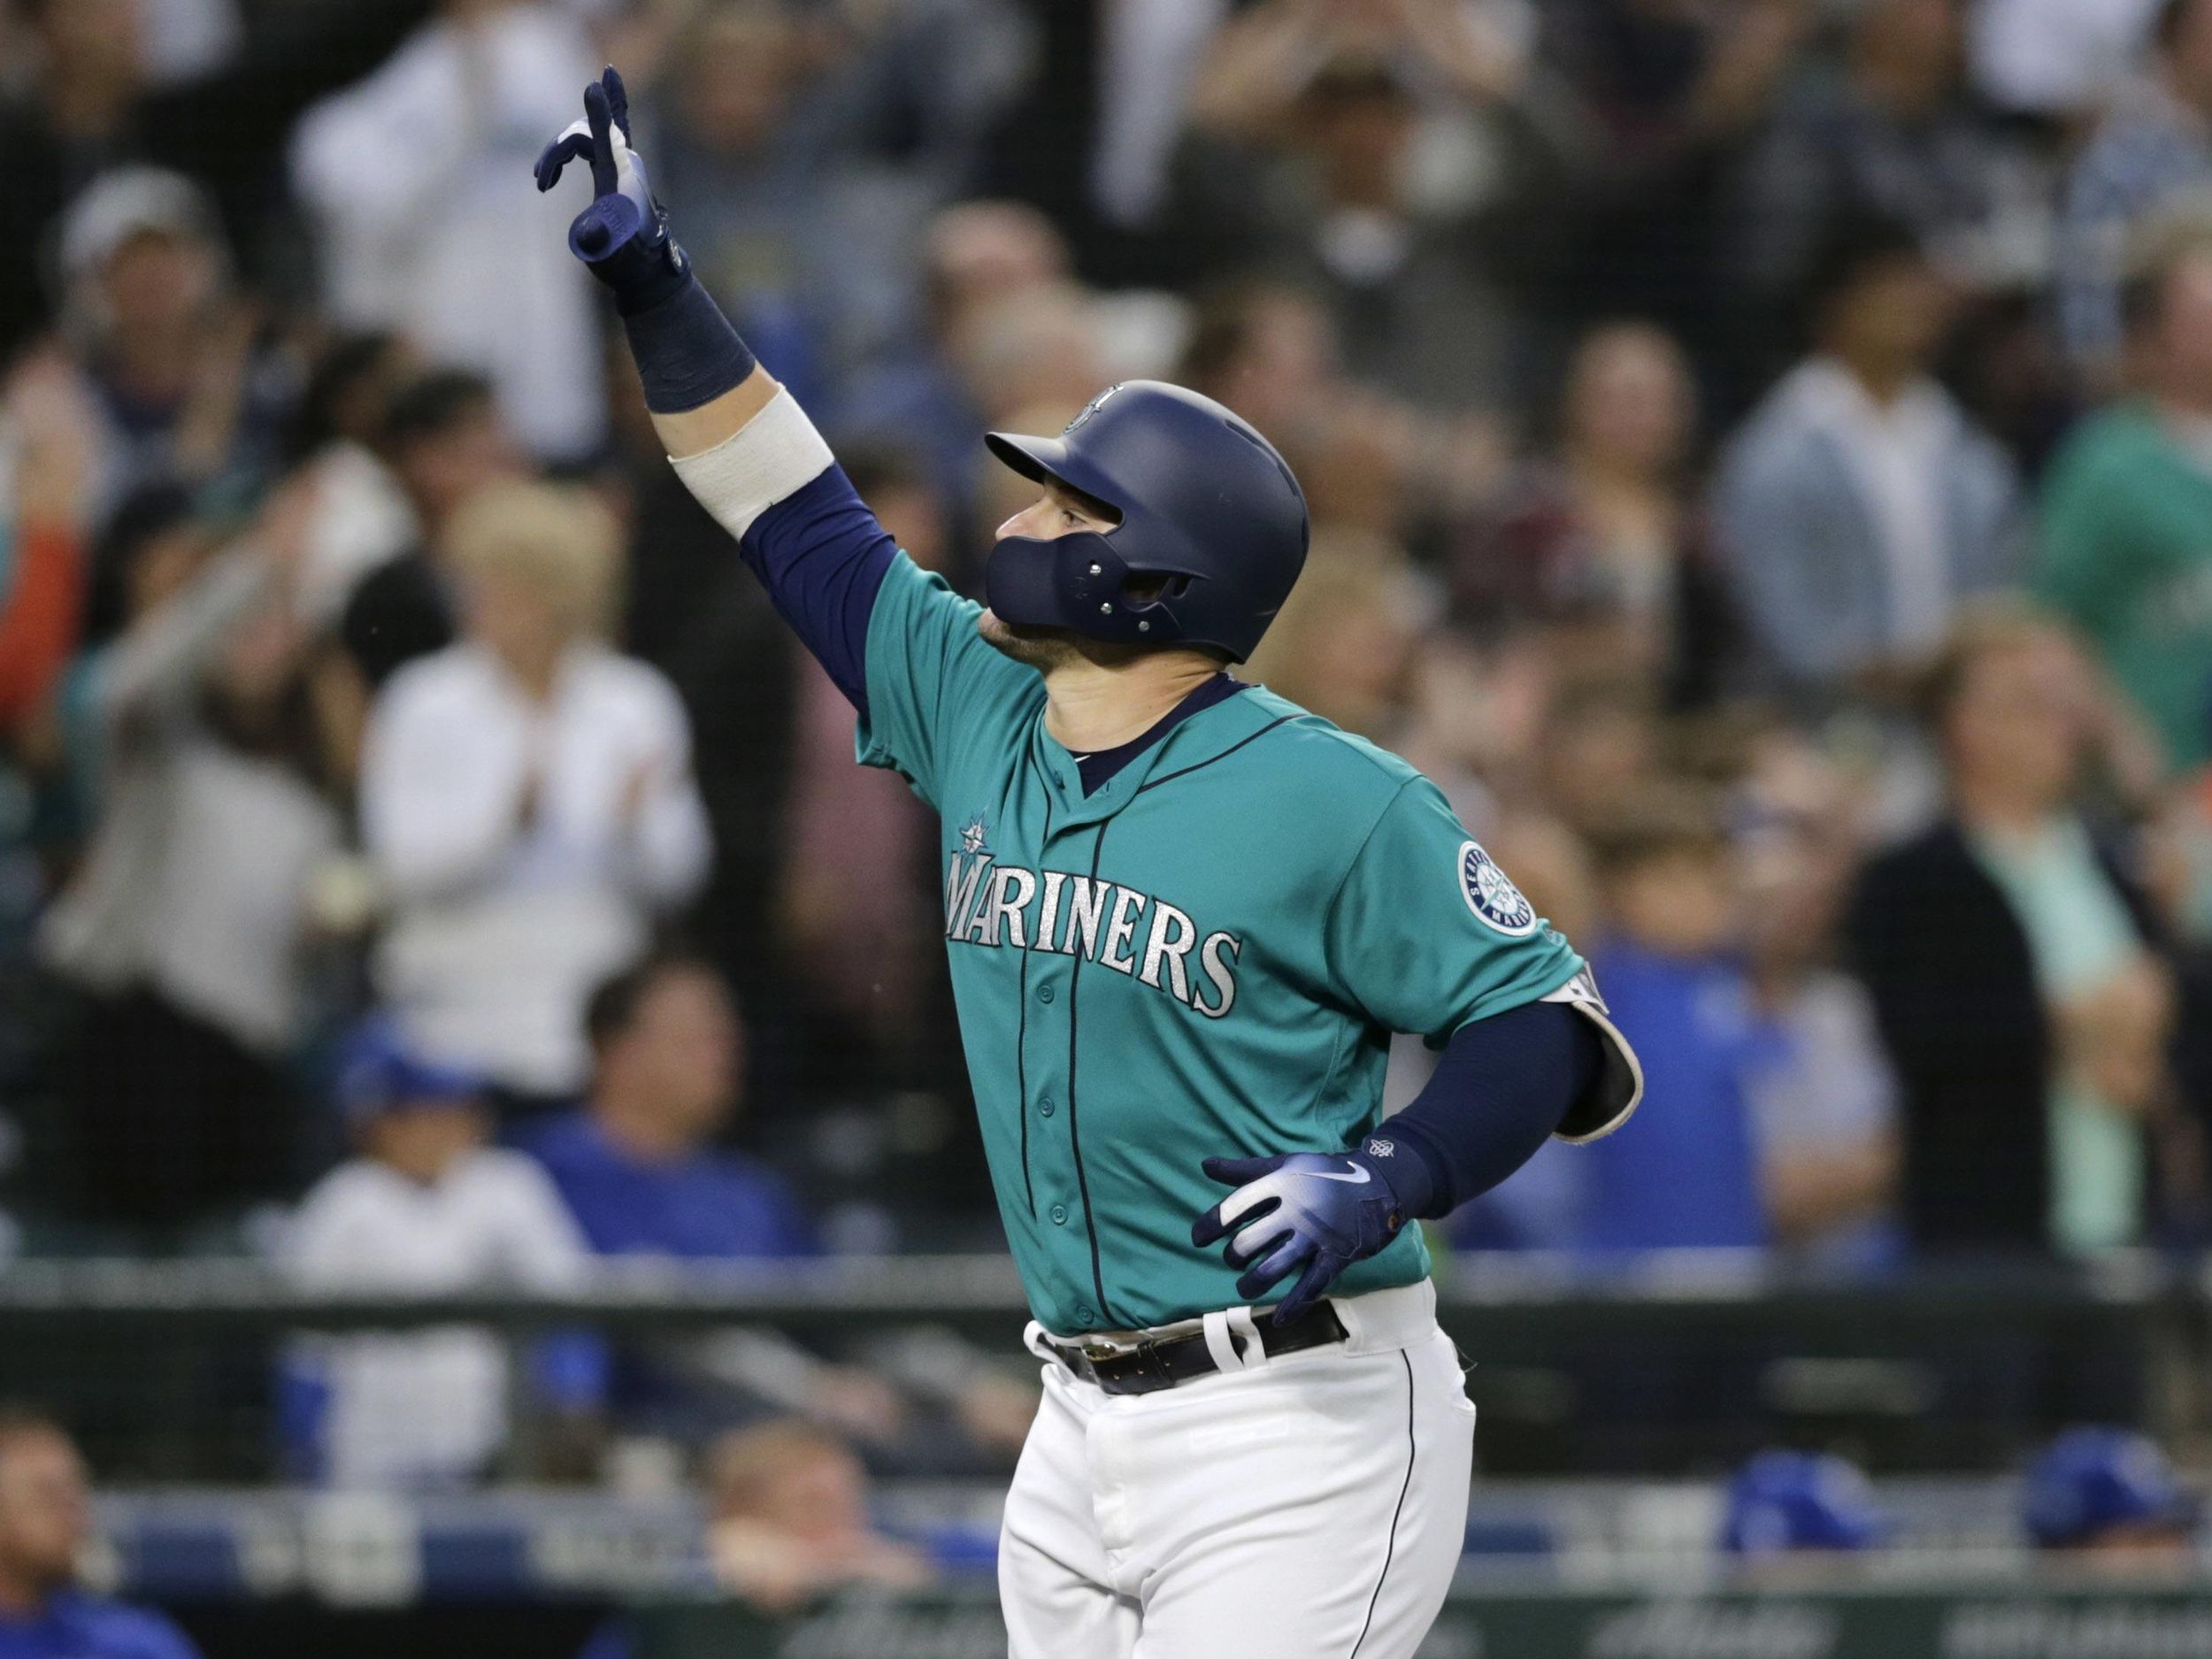 Mike Zunino hopes to be back behind the plate for the Mariners on Saturday